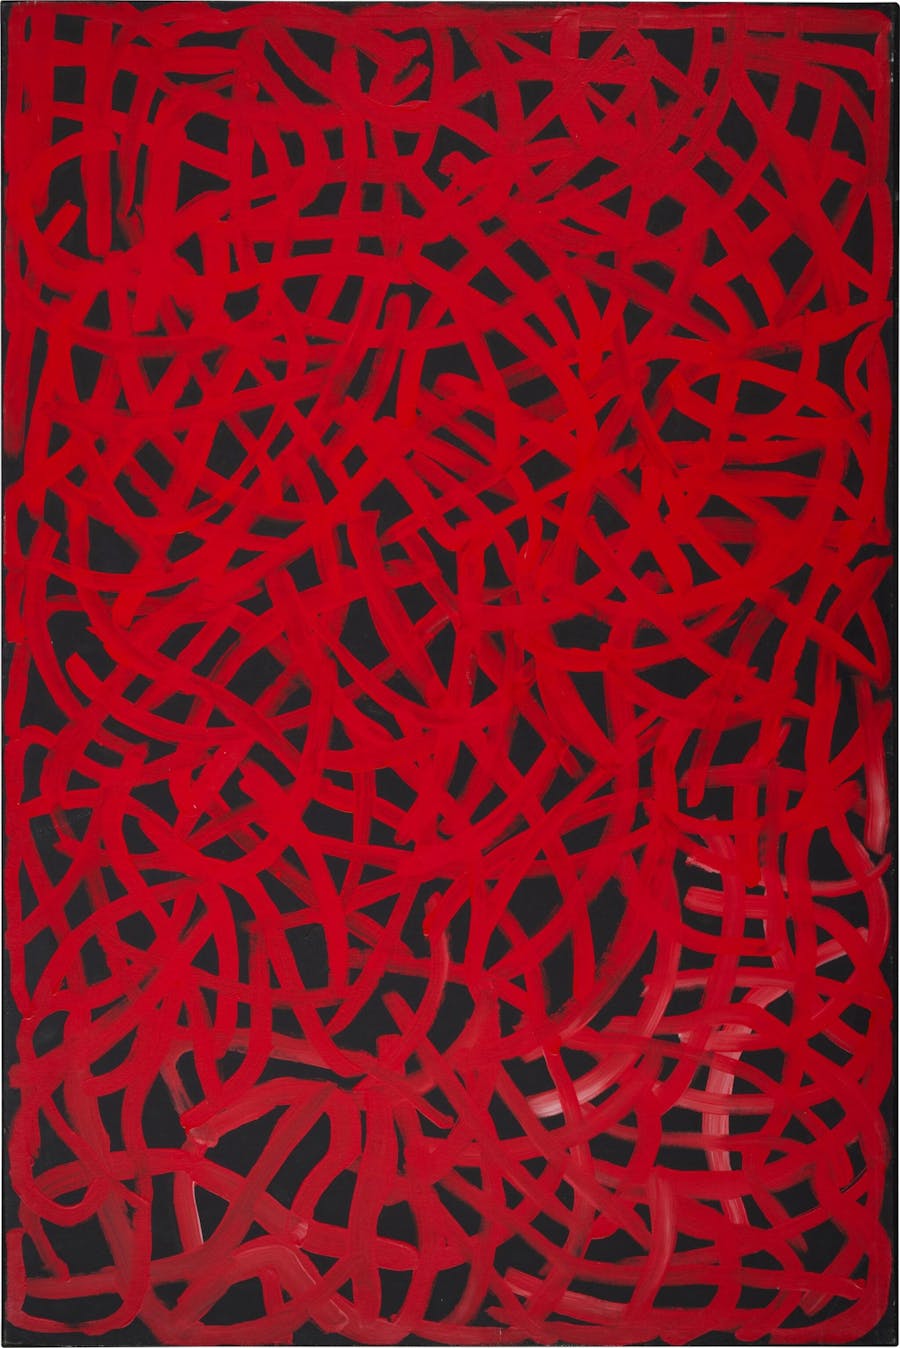 Emily Kame Kngwarreye, My Country/Yam Dreaming, 1995. Image © Sotheby's